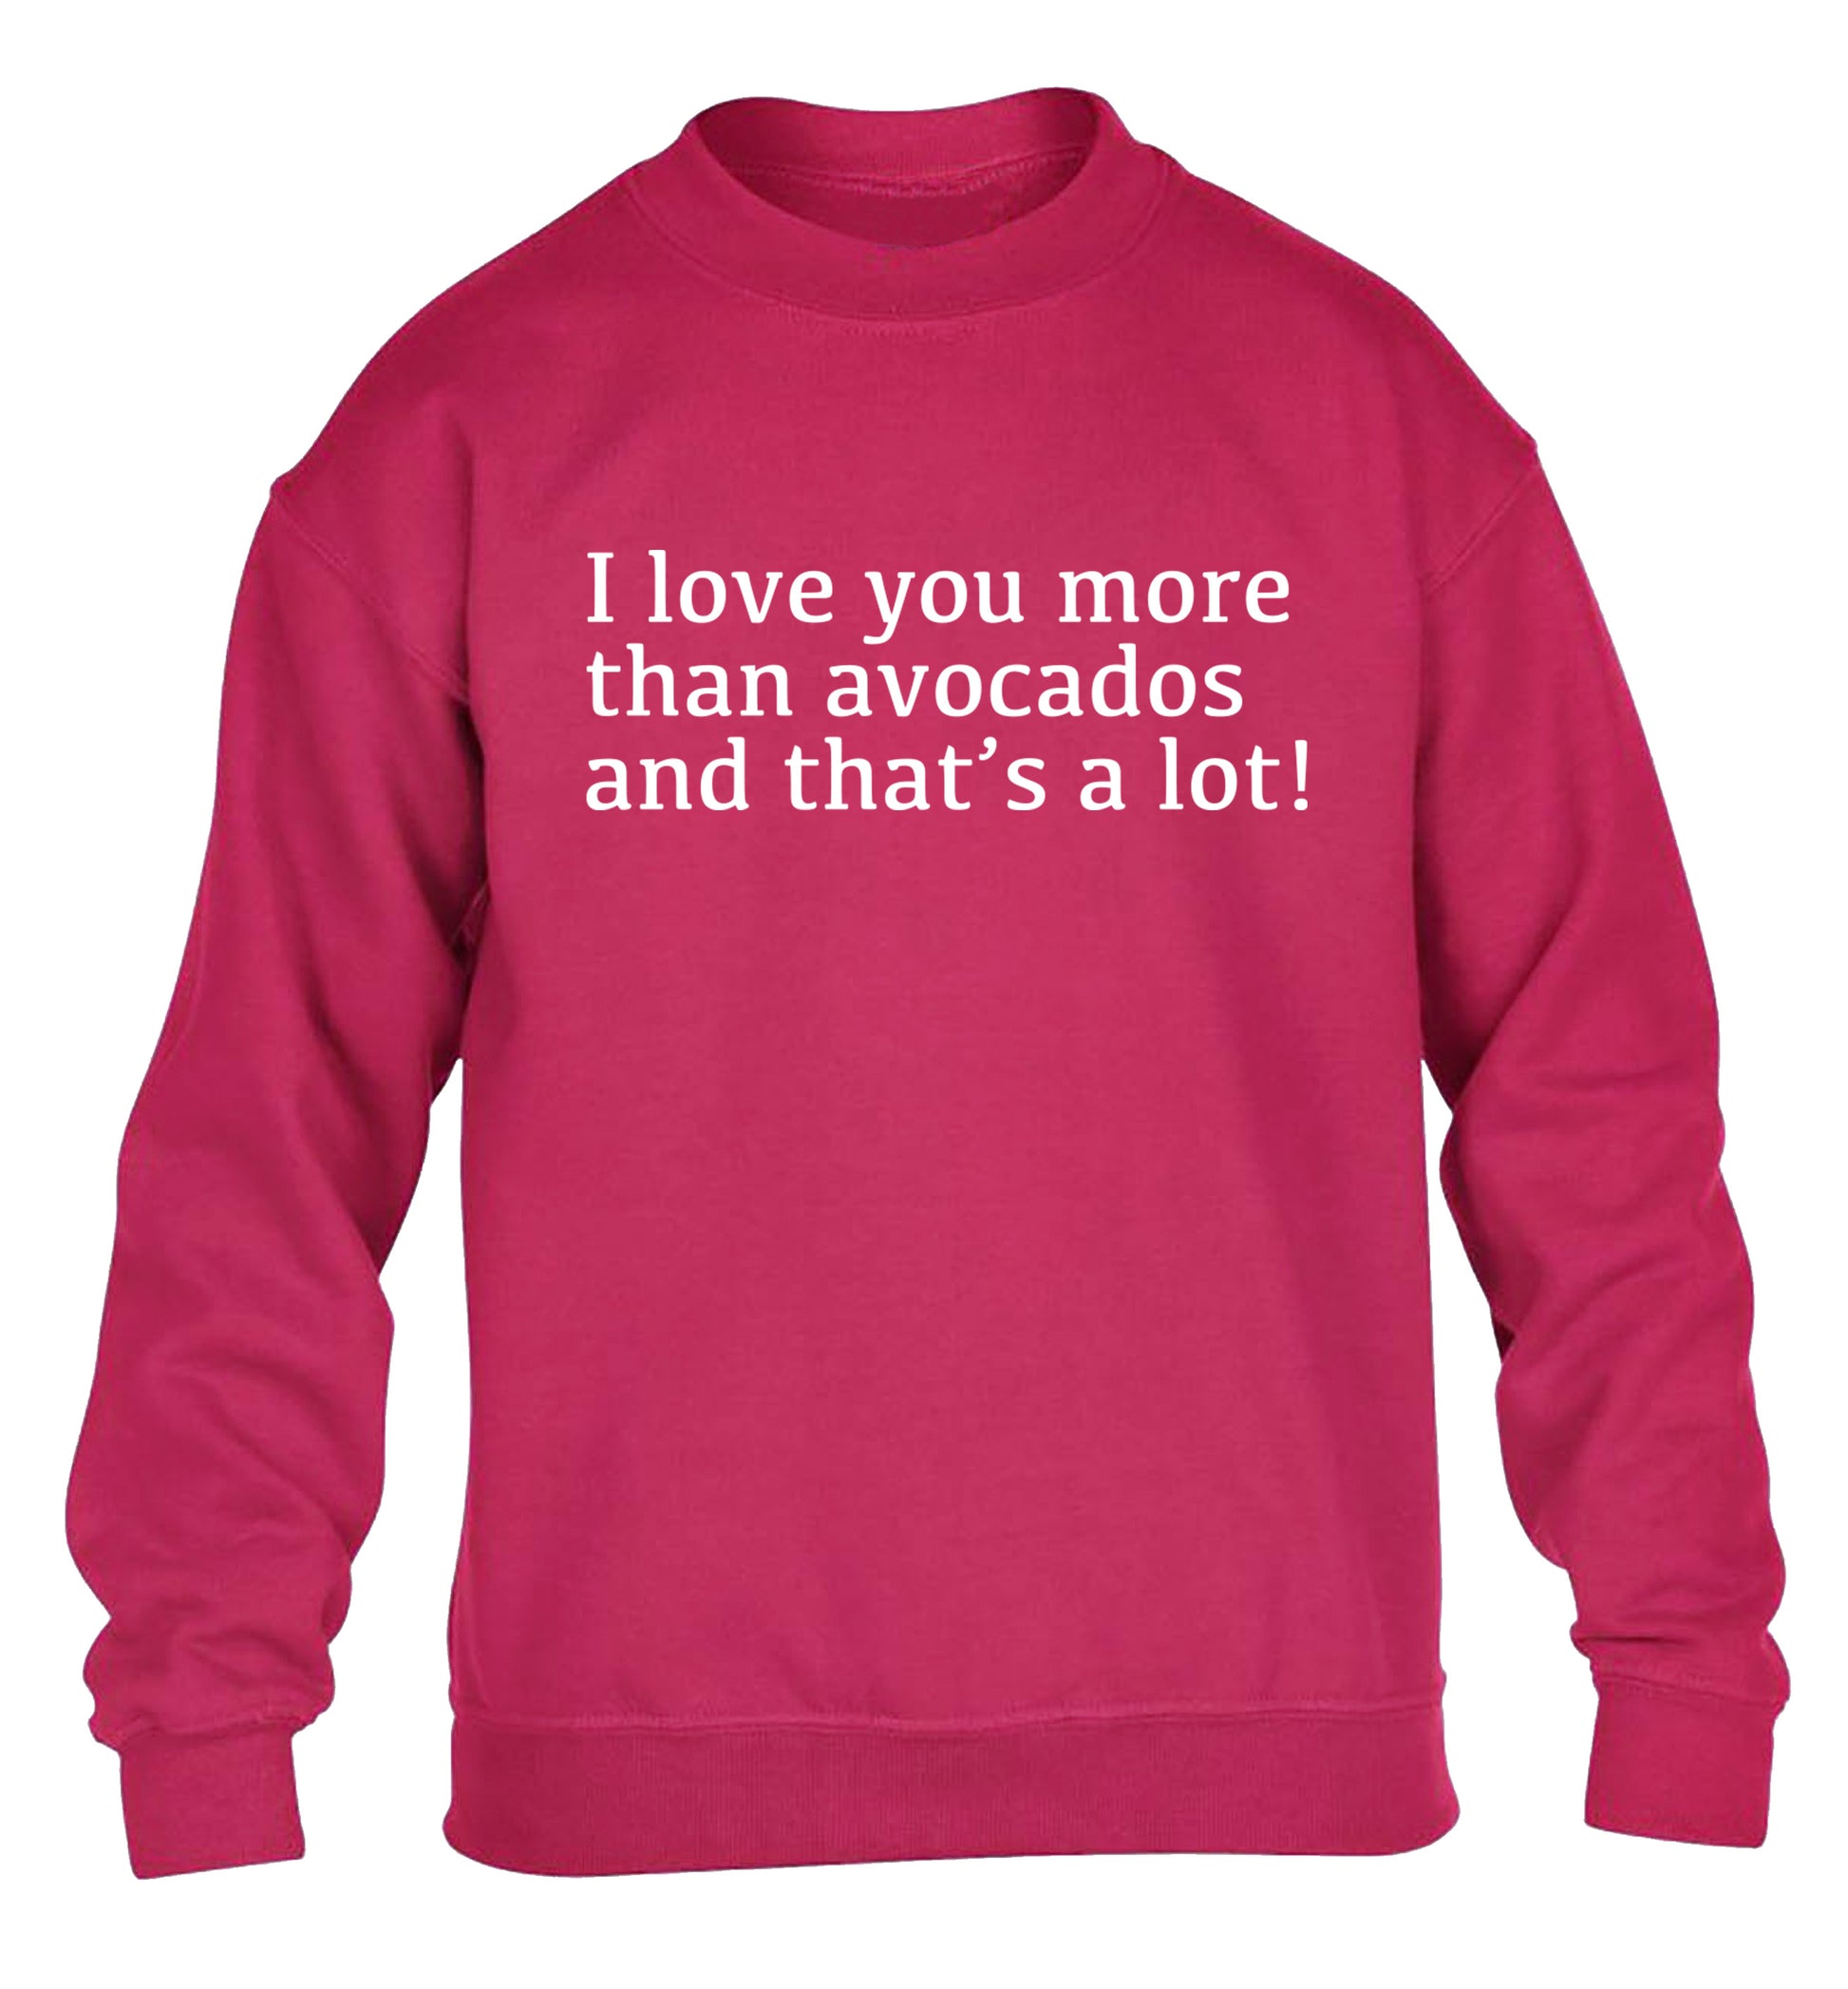 I love you more than avocados and that's a lot children's pink sweater 12-14 Years